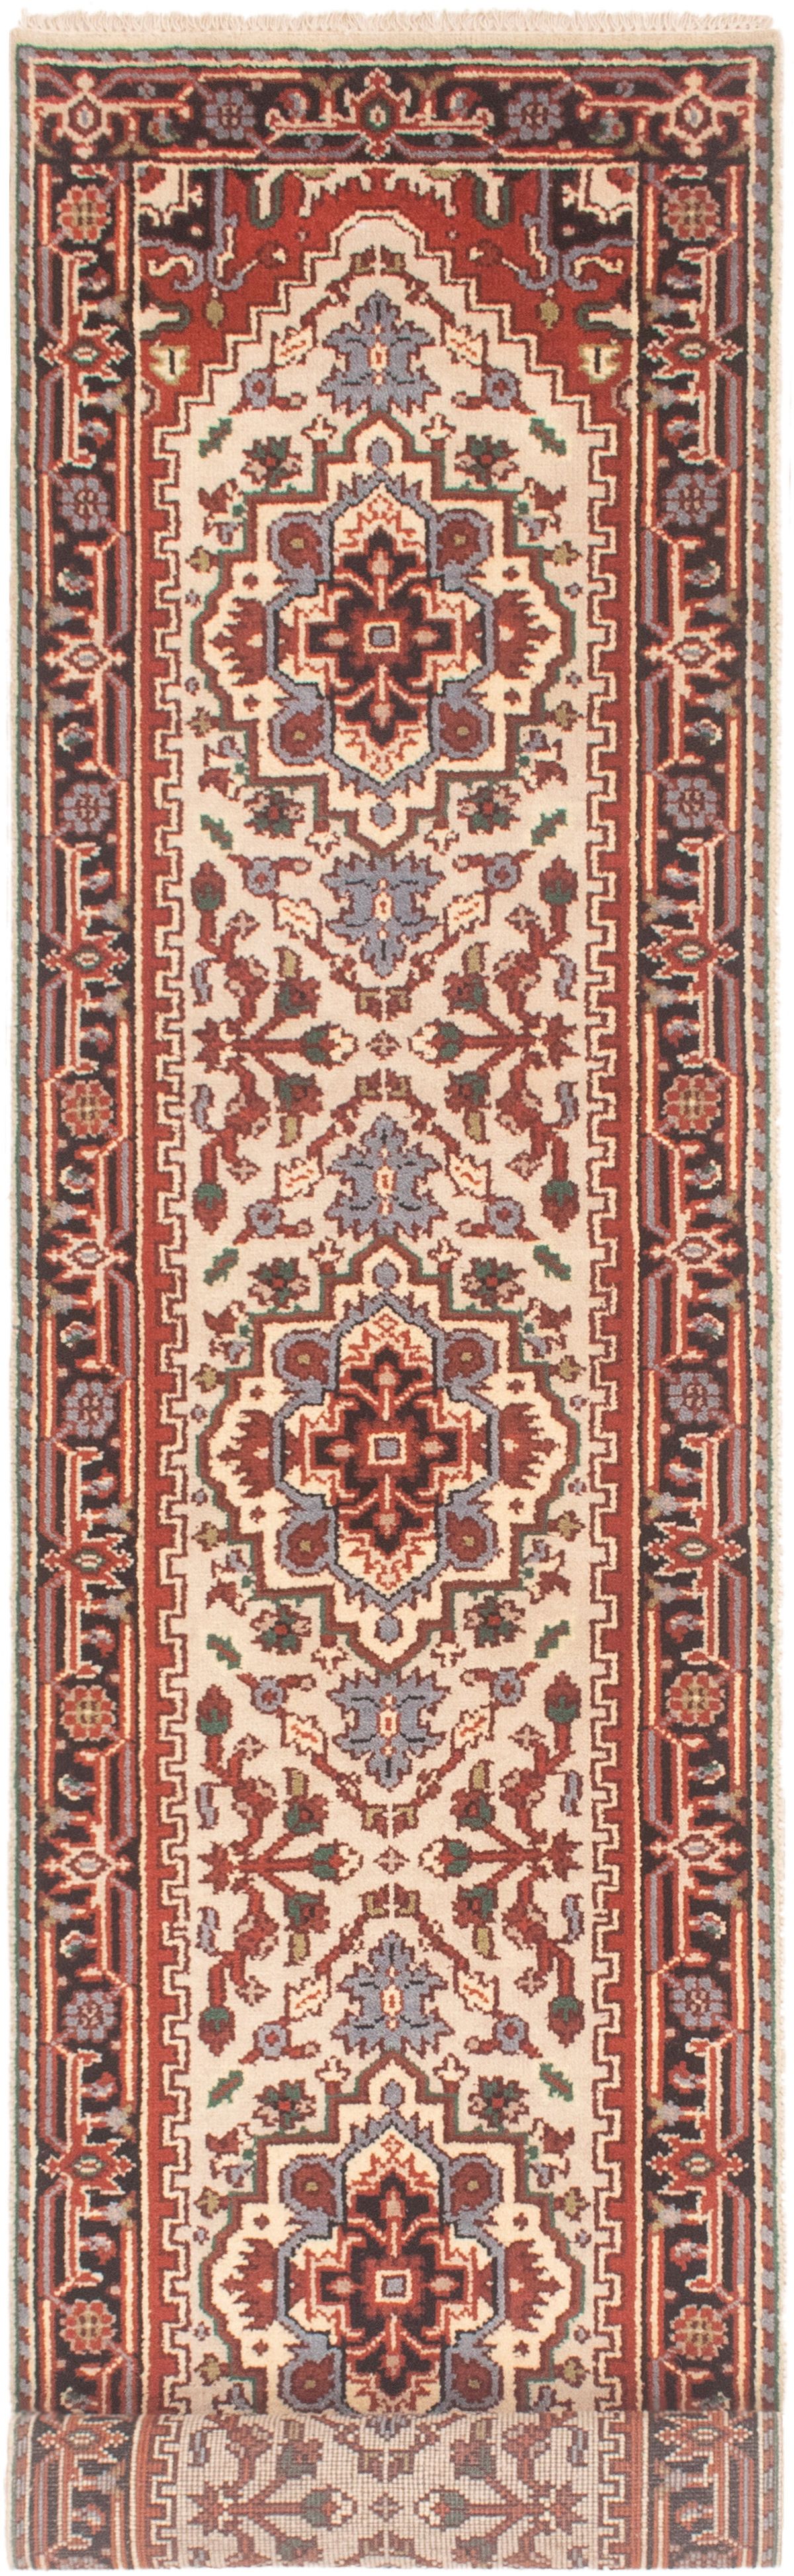 Hand-knotted Serapi Heritage Cream Wool Rug 2'7" x 11'5" Size: 2'7" x 11'5"  